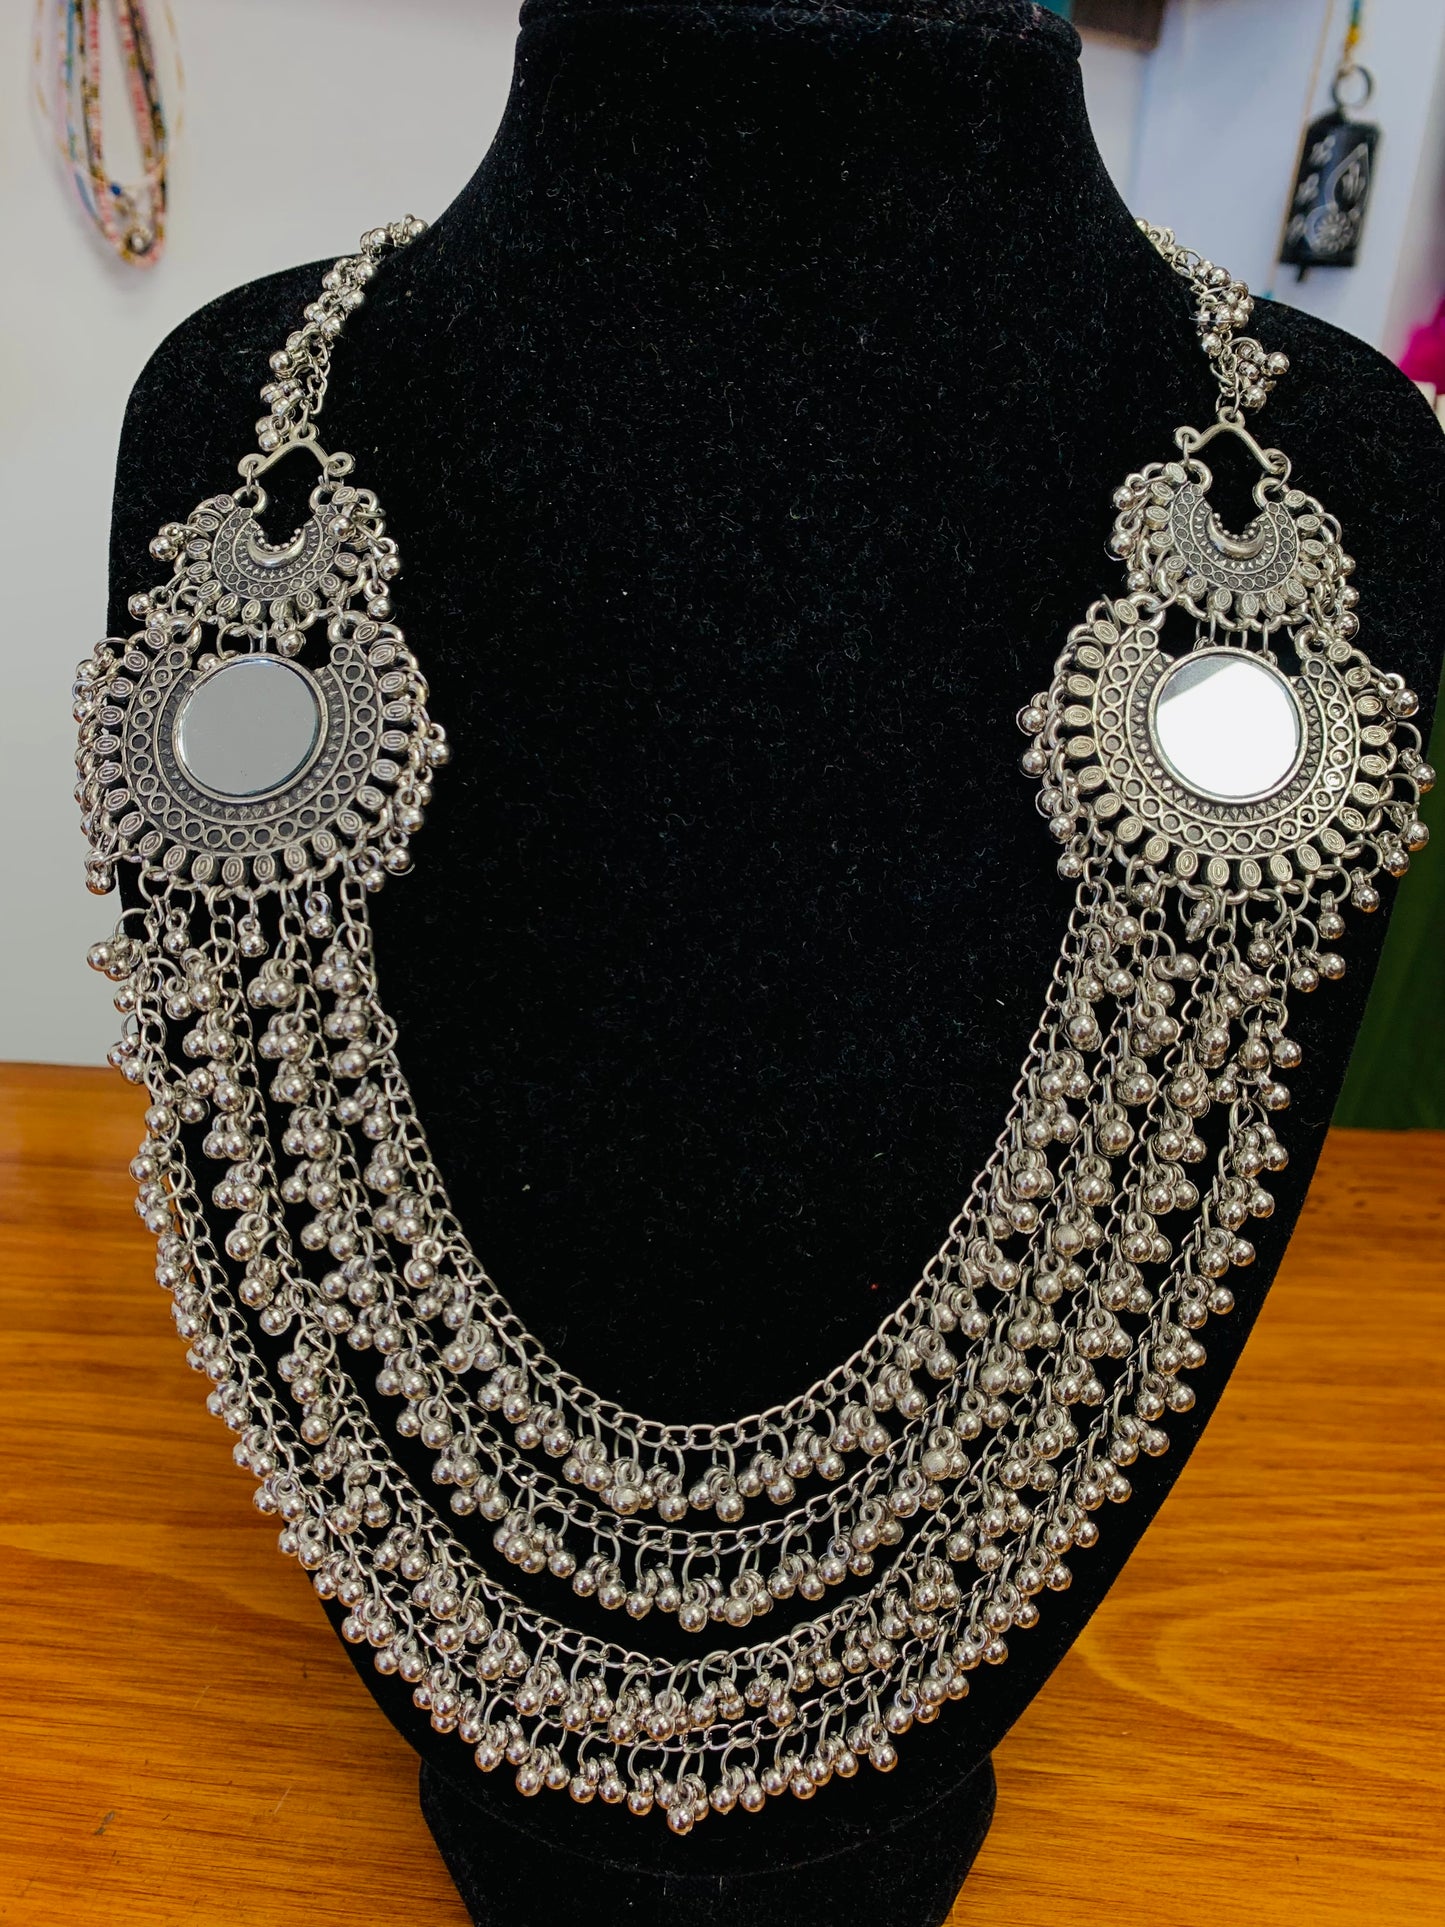 BOHEMIAN STYLE HANDCRAFTED MIRROR NECKLACE #NECK42